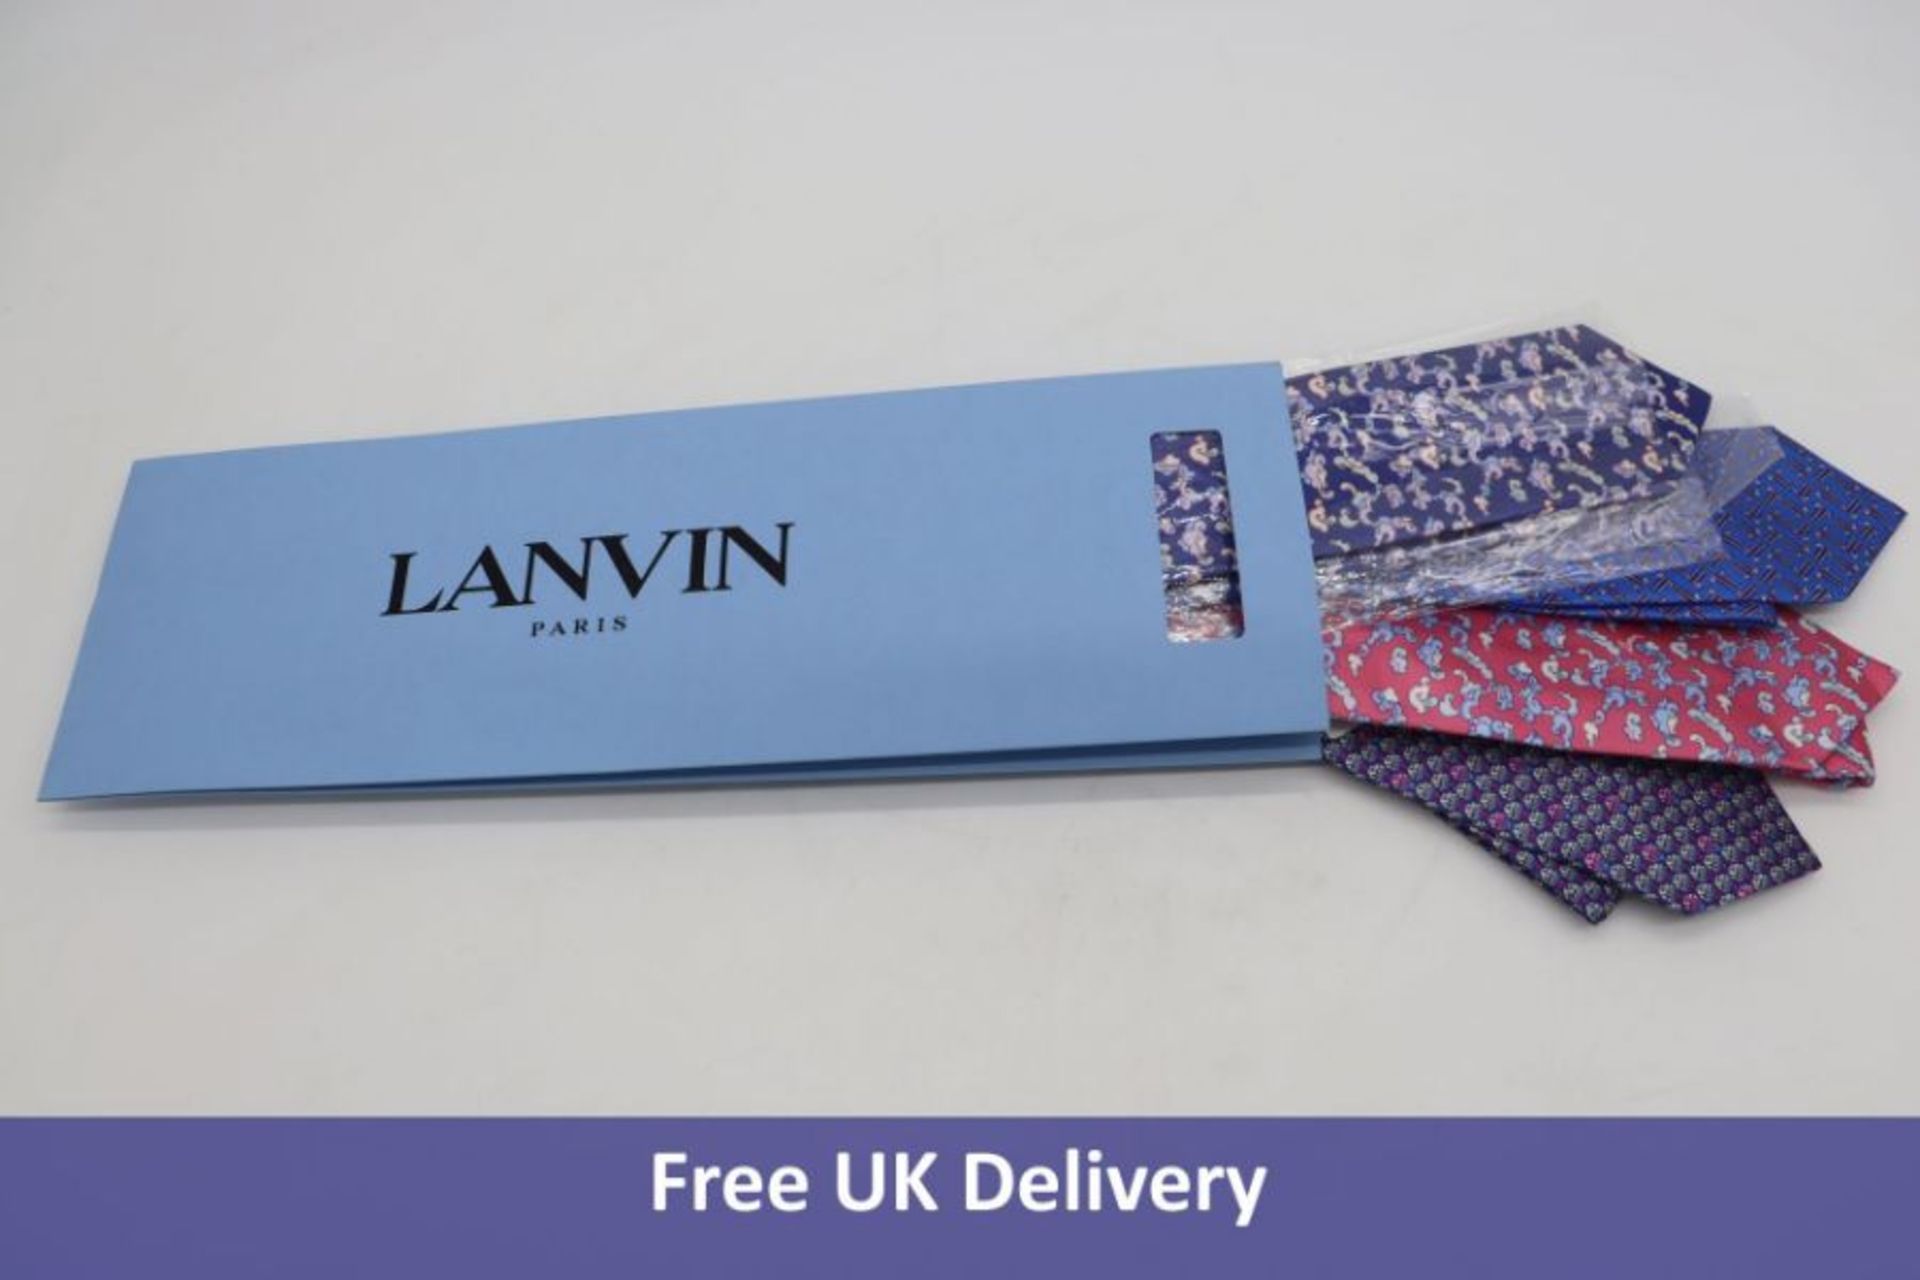 Four Lanvin Silk Ties, 4 Asst Colours and Styles, Will Vary